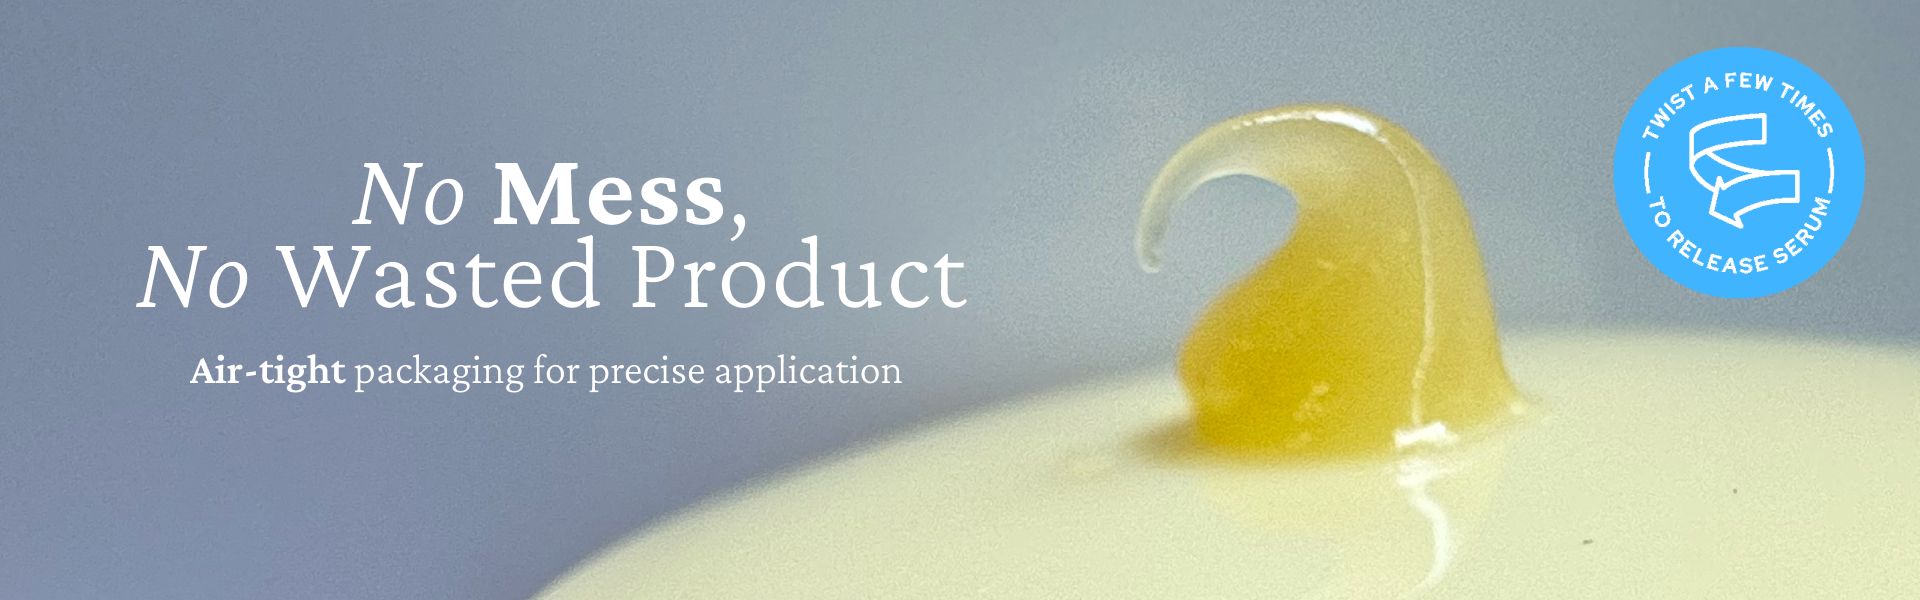 A close-up of a yellow serum blob on a surface with text saying "No Mess, No Wasted Product. Air-tight packaging for precise application." On the right, a circular icon reads "Twist a Few Times to Release Serum" with an illustration of a twisting motion.